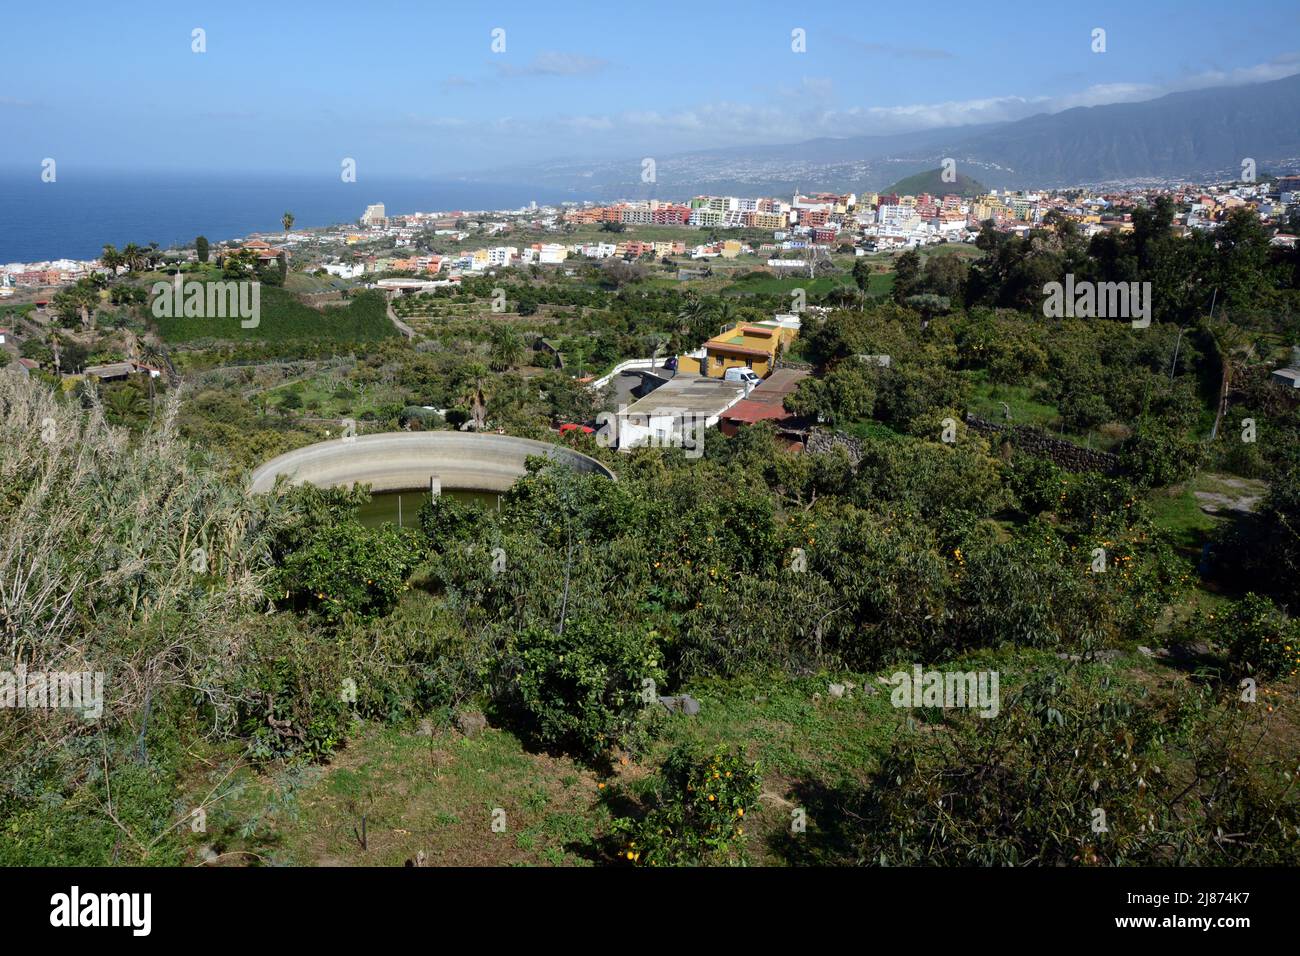 A Spanish finca, or farming plantation, near the town of Los Realejos, on the island of Tenerife, Canary Islands, Spain. Stock Photo